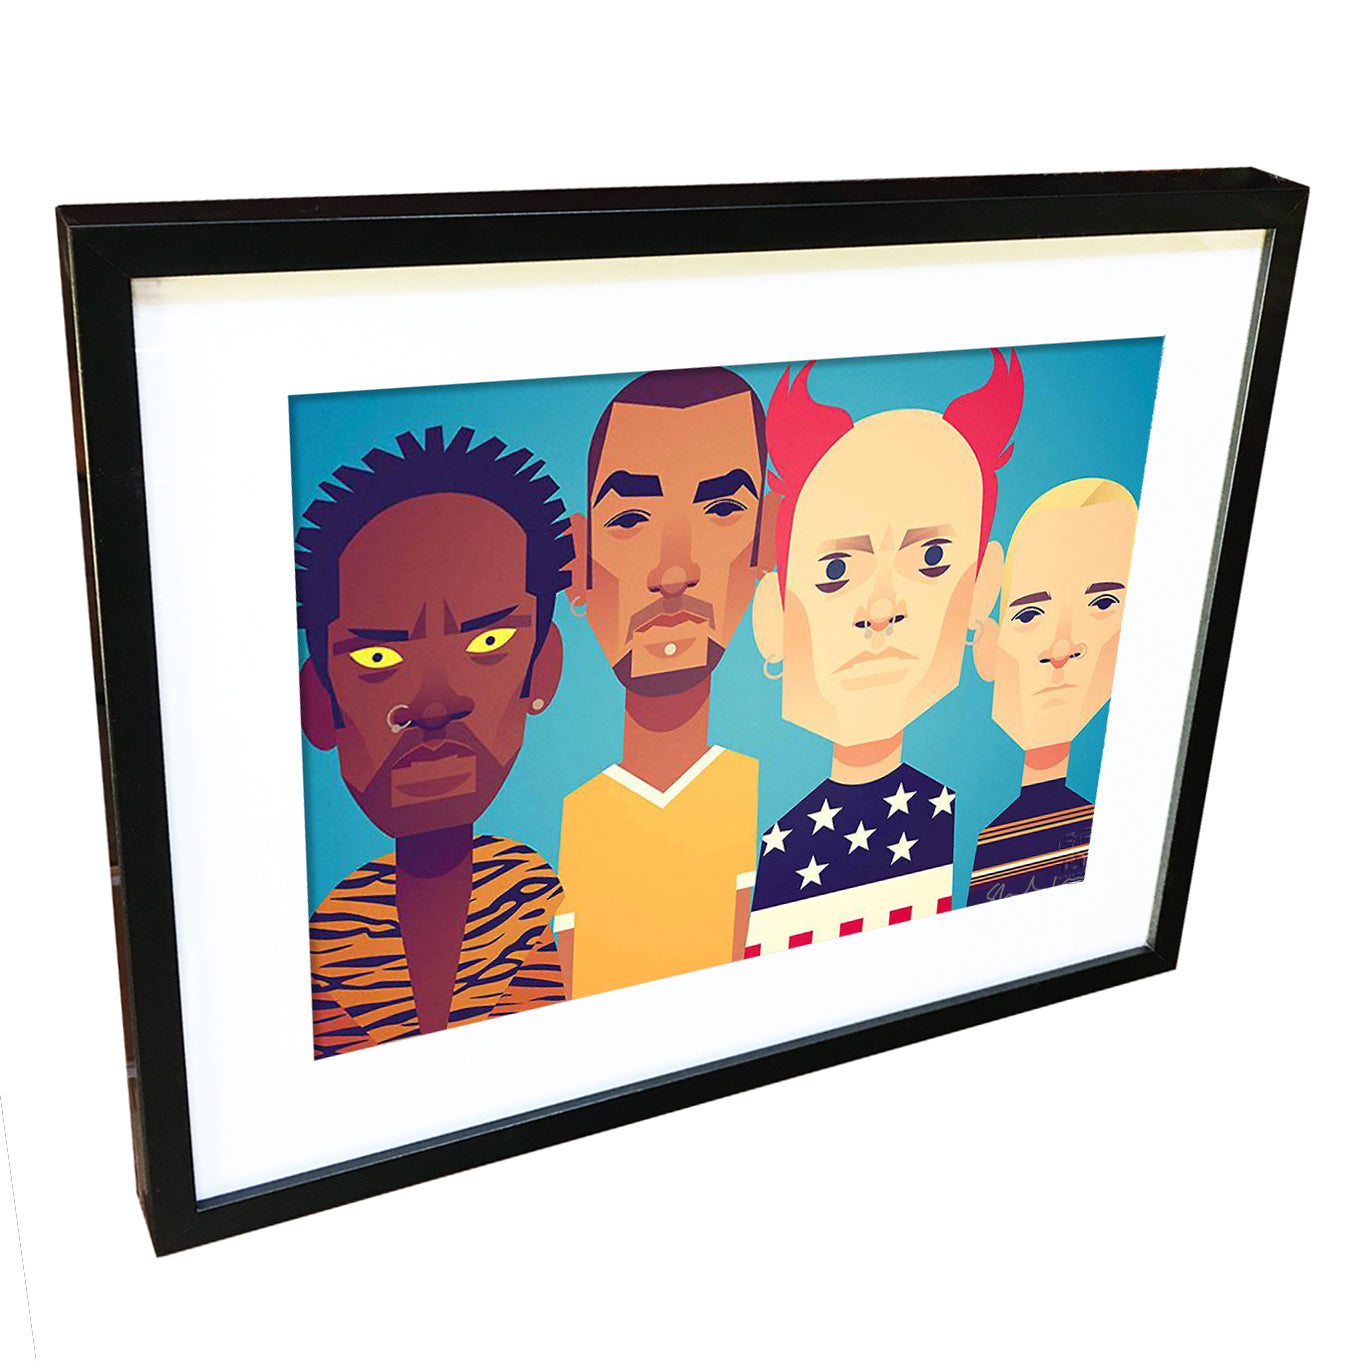 The Prodigy by Stanley Chow - Signed and stamped fine art print - Egoiste Gallery - Art Gallery in Manchester City Centre